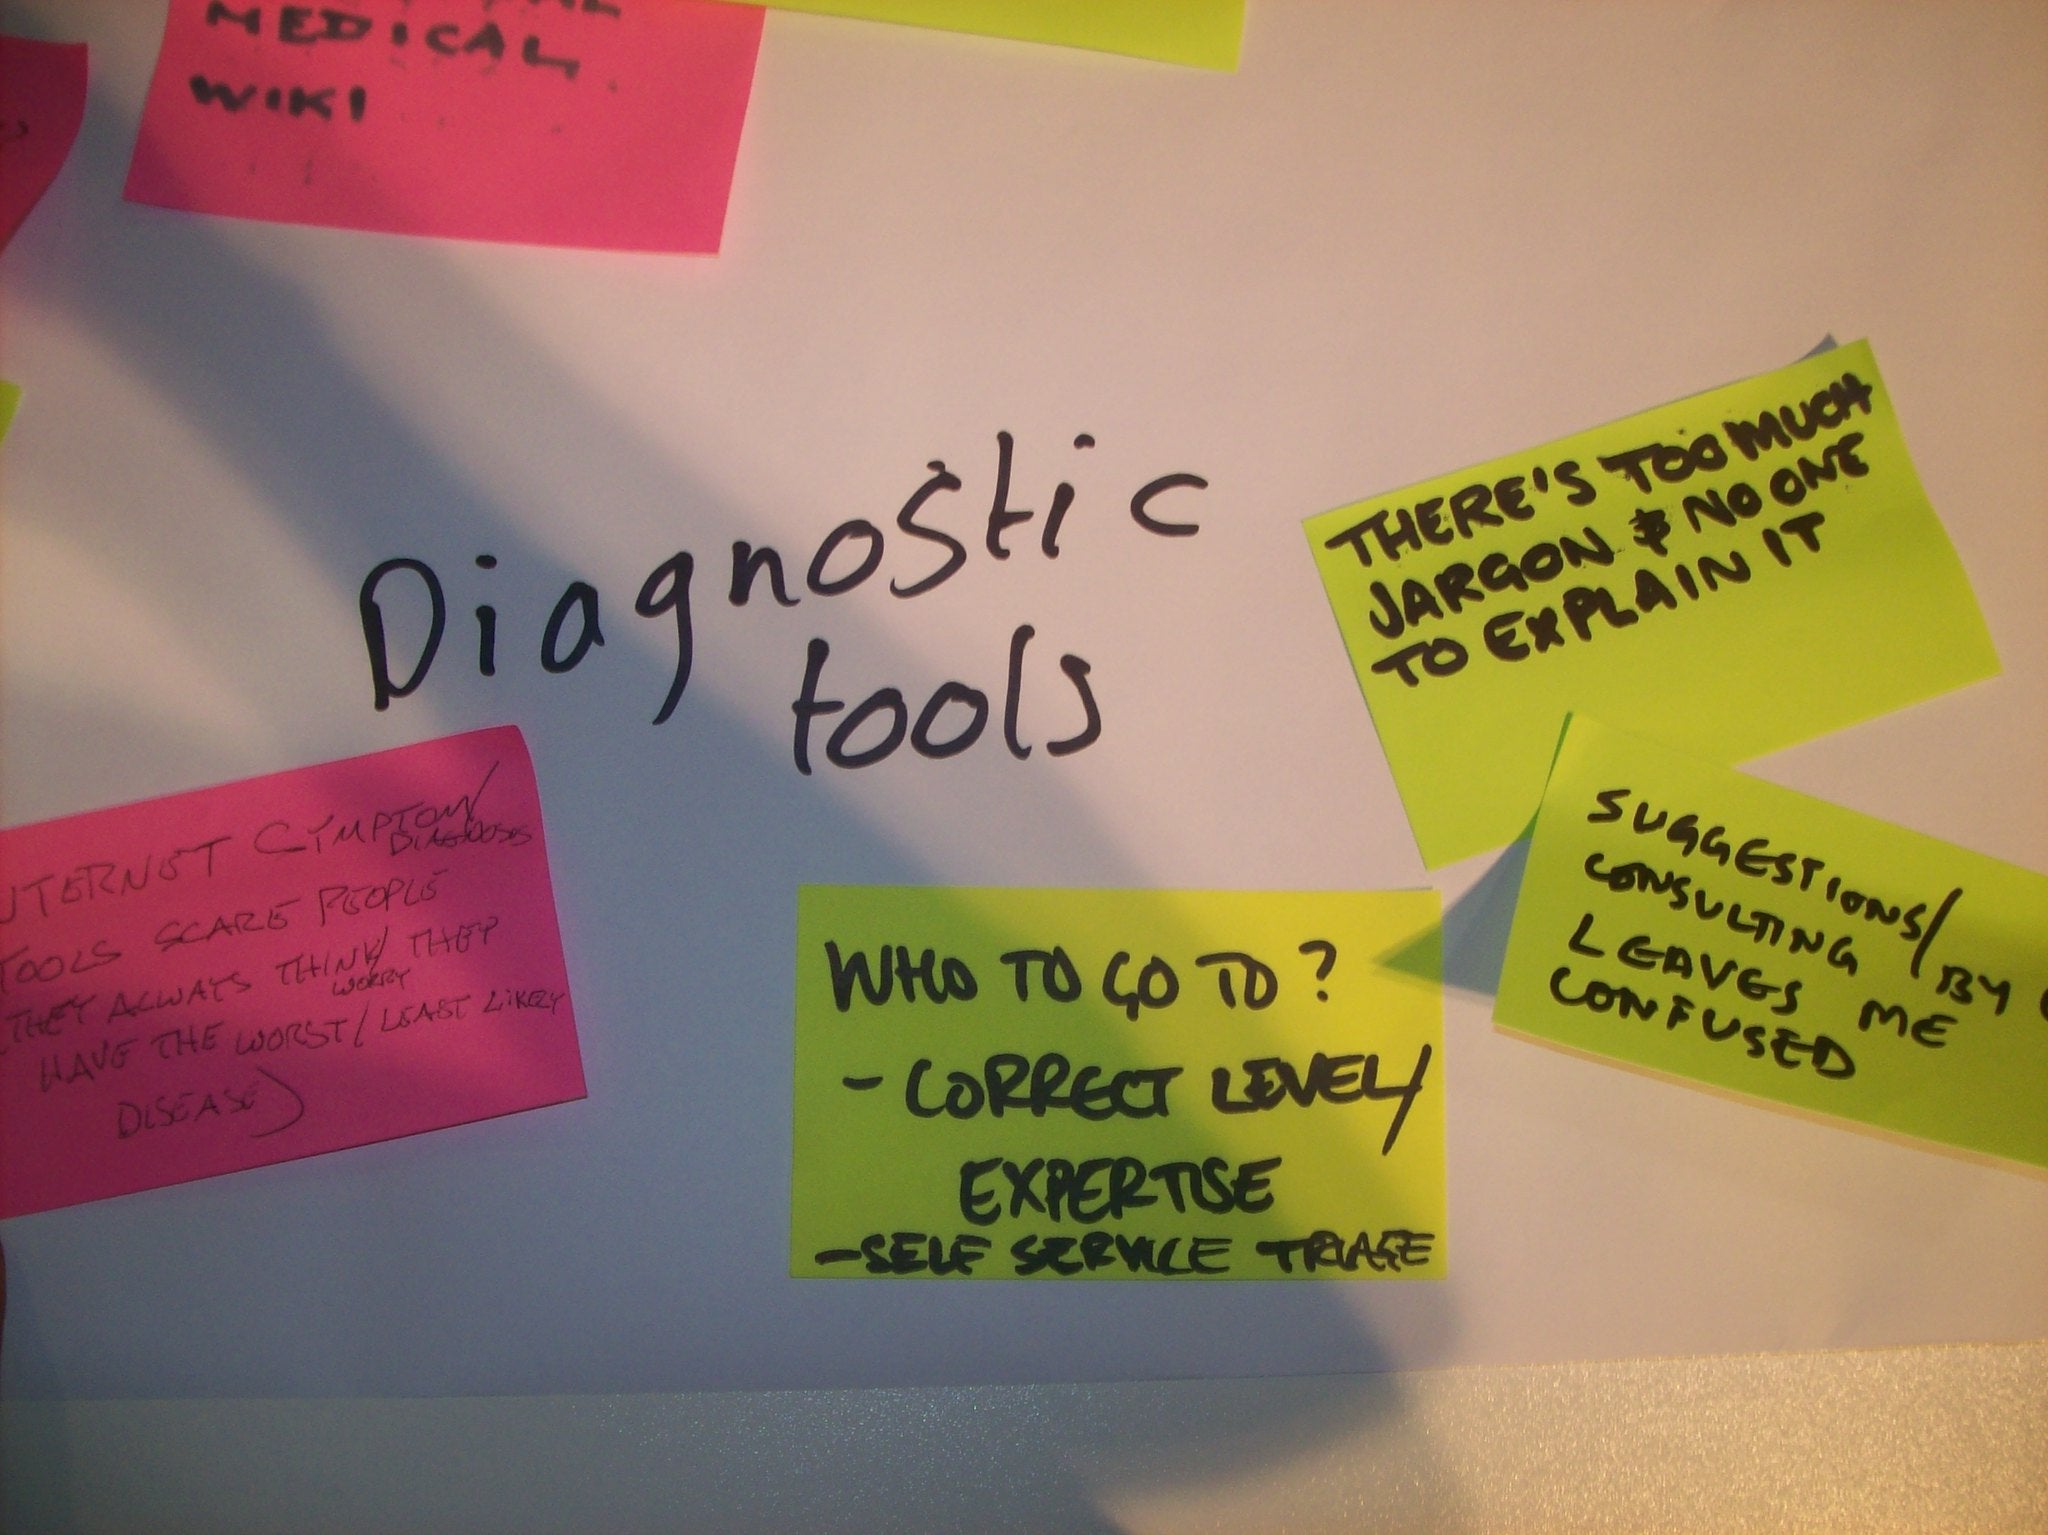 Collage of post-its under the title "Diagnostic tools". The post-its say "There's too much jargon and no one to explain", "Suggestions/consulting leaves me confused", "Internet tools symptom/disease tools scare people, they always think they have the worst/least likely disease", and "Who to go to -correct level, -expertise, -self-service triage"